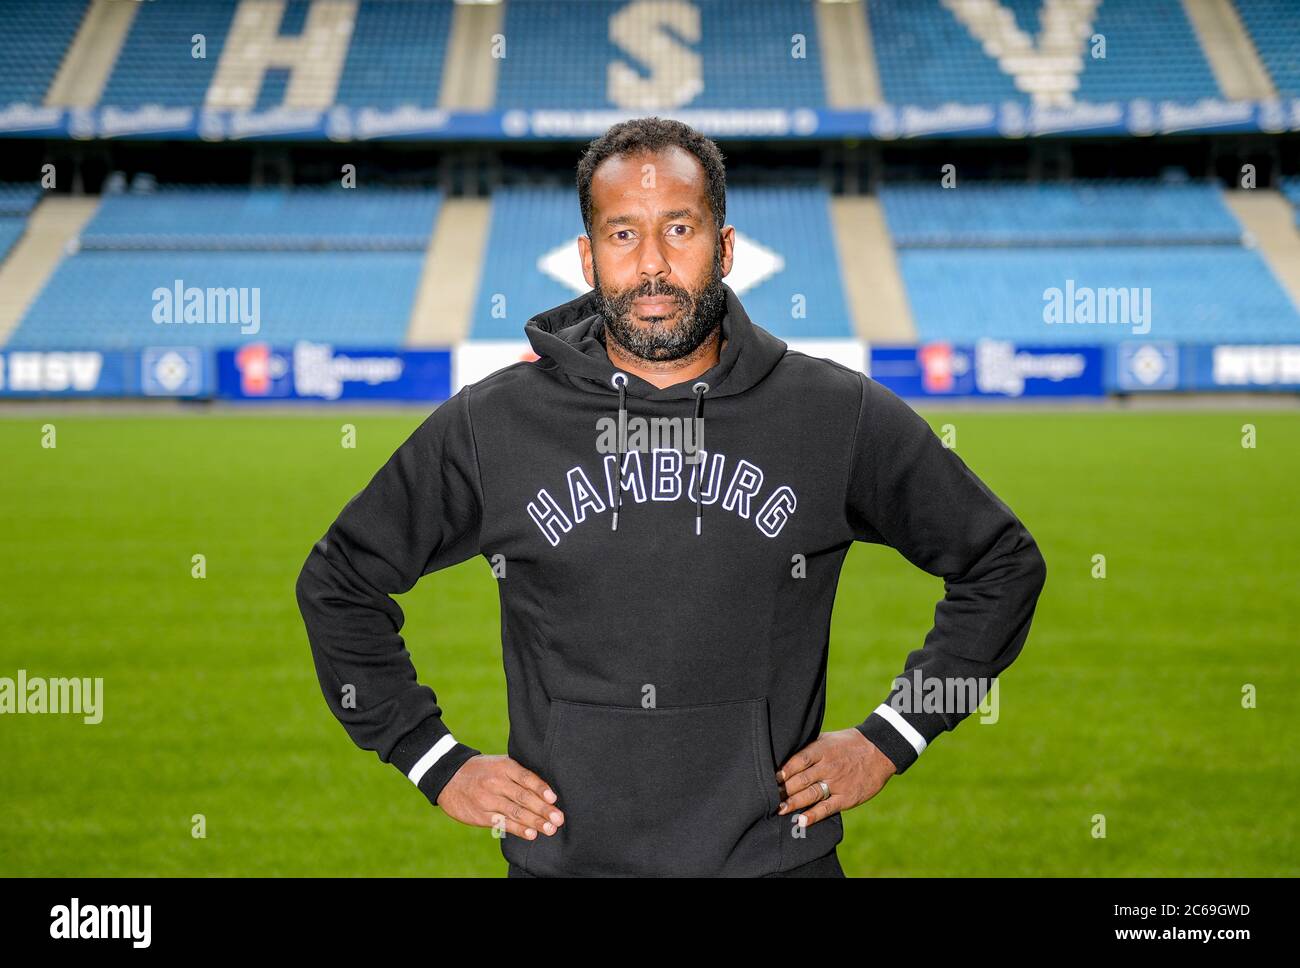 Hamburg, Germany. 08th July, 2020. Daniel Thioune, the new coach of Hamburger  SV, is standing on the grass of the Volksparkstadion. Credit: Axel  Heimken/dpa - IMPORTANT NOTE: In accordance with the regulations